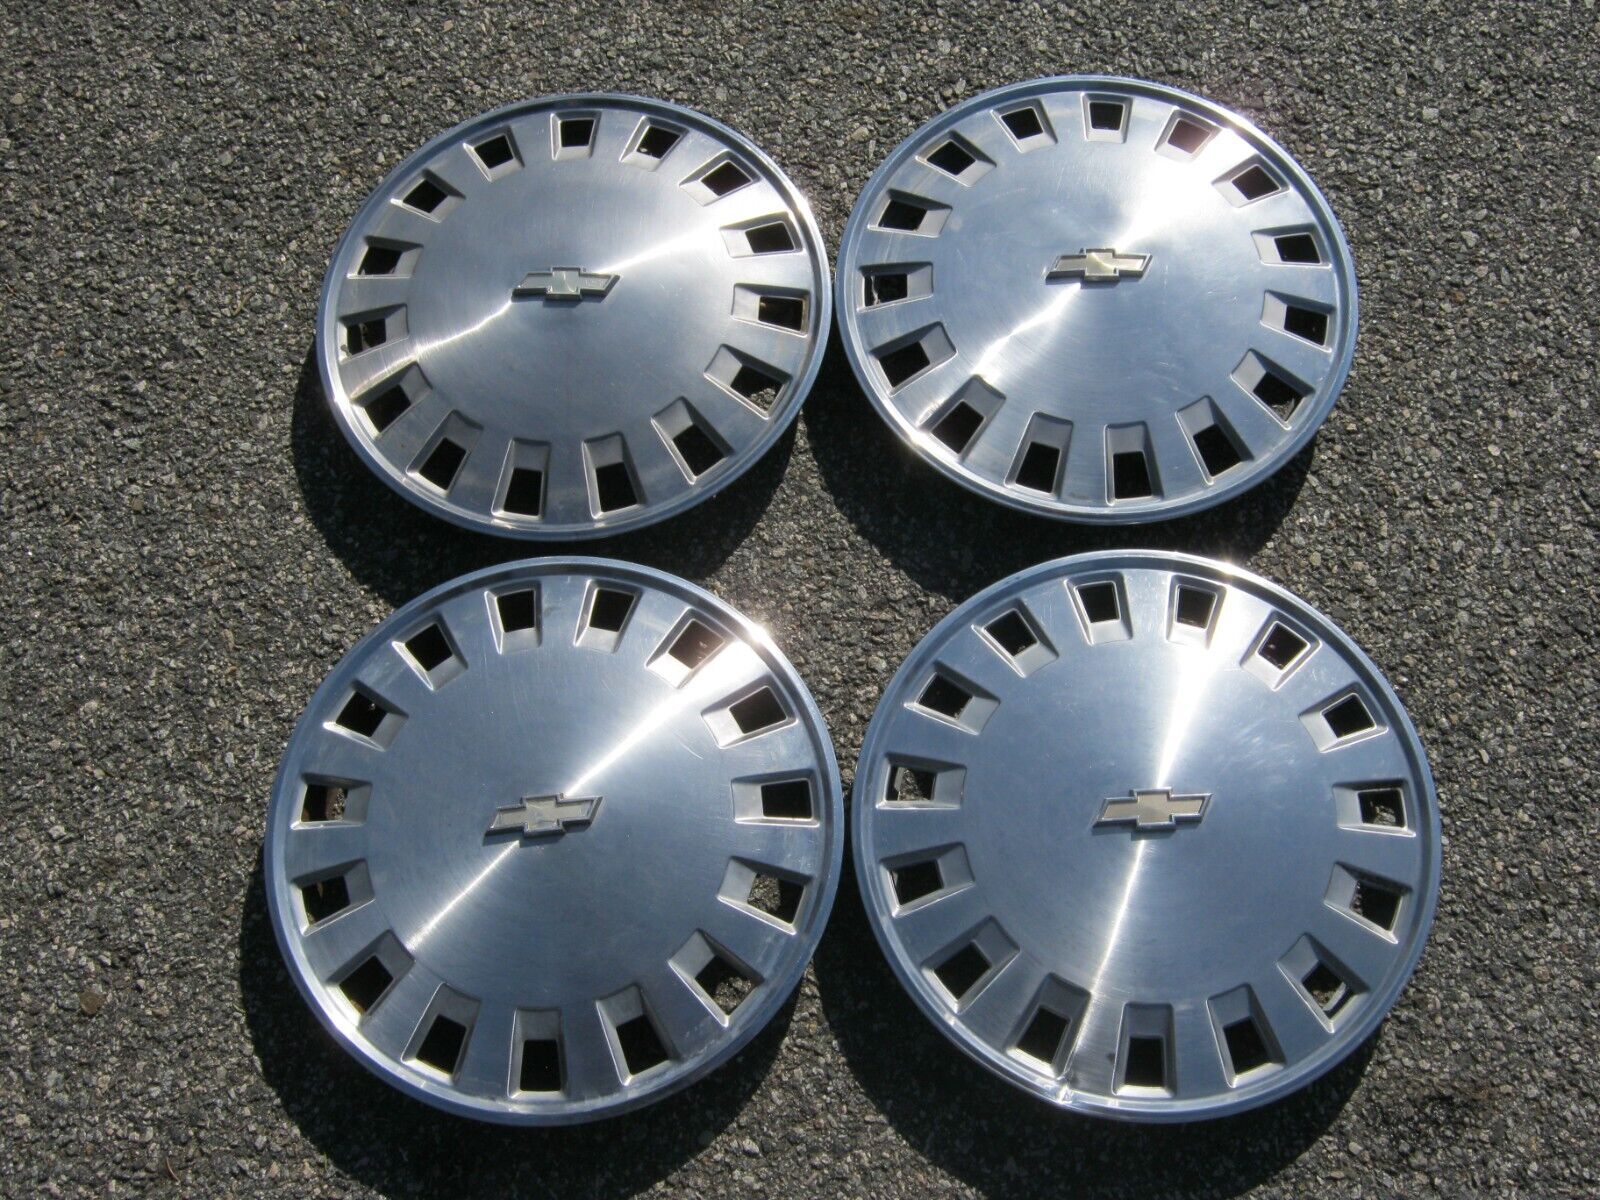 Factory original 1986 to 1990 Chevy Celebrity 14 inch hubcaps wheel covers